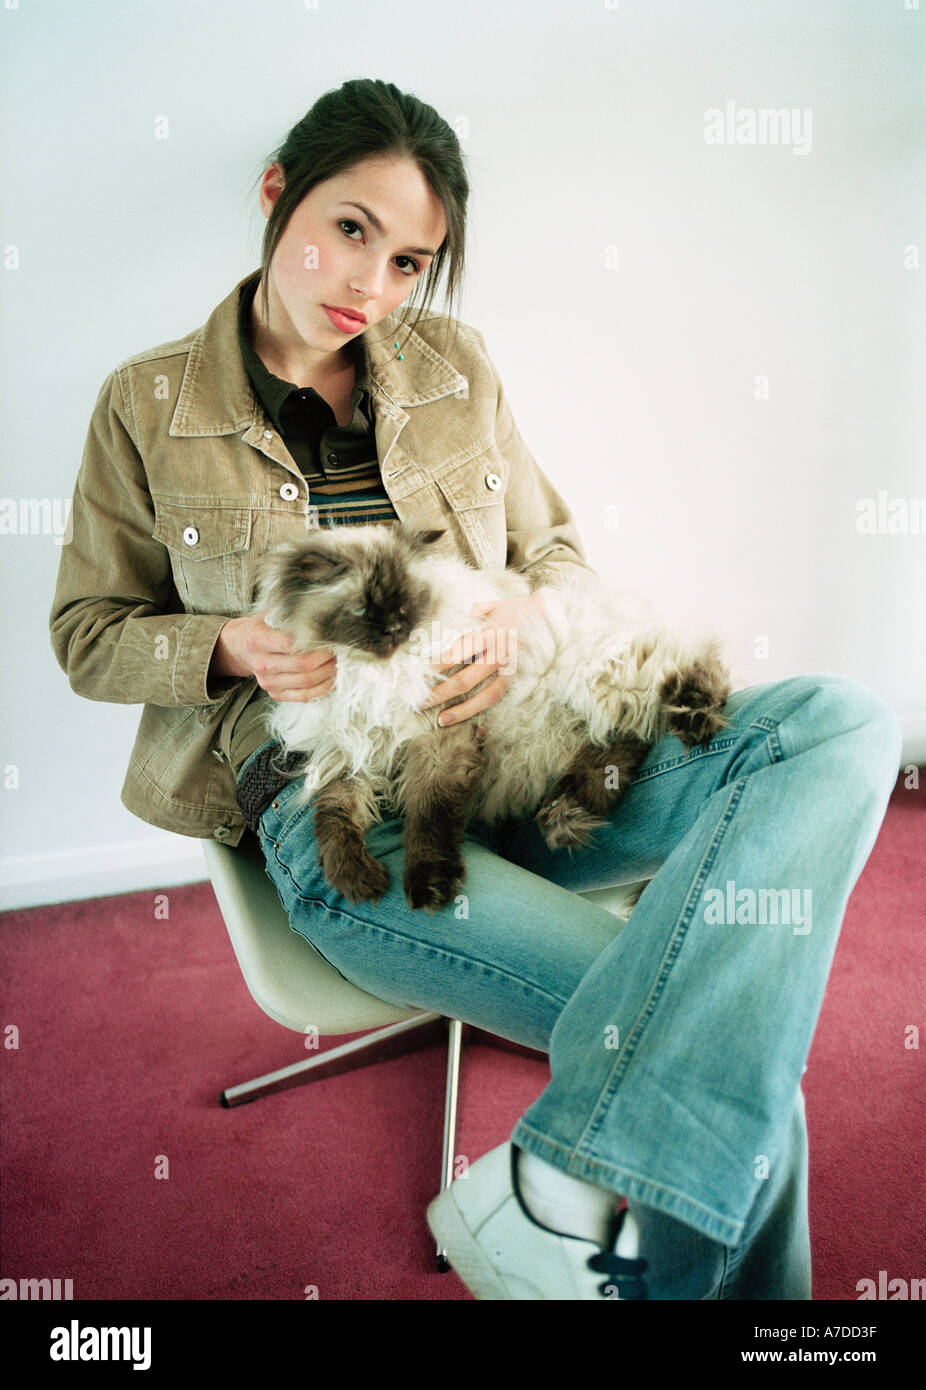 TEENAGER HOLDING BIG FUR CAT IN HER LAP Stock Photo